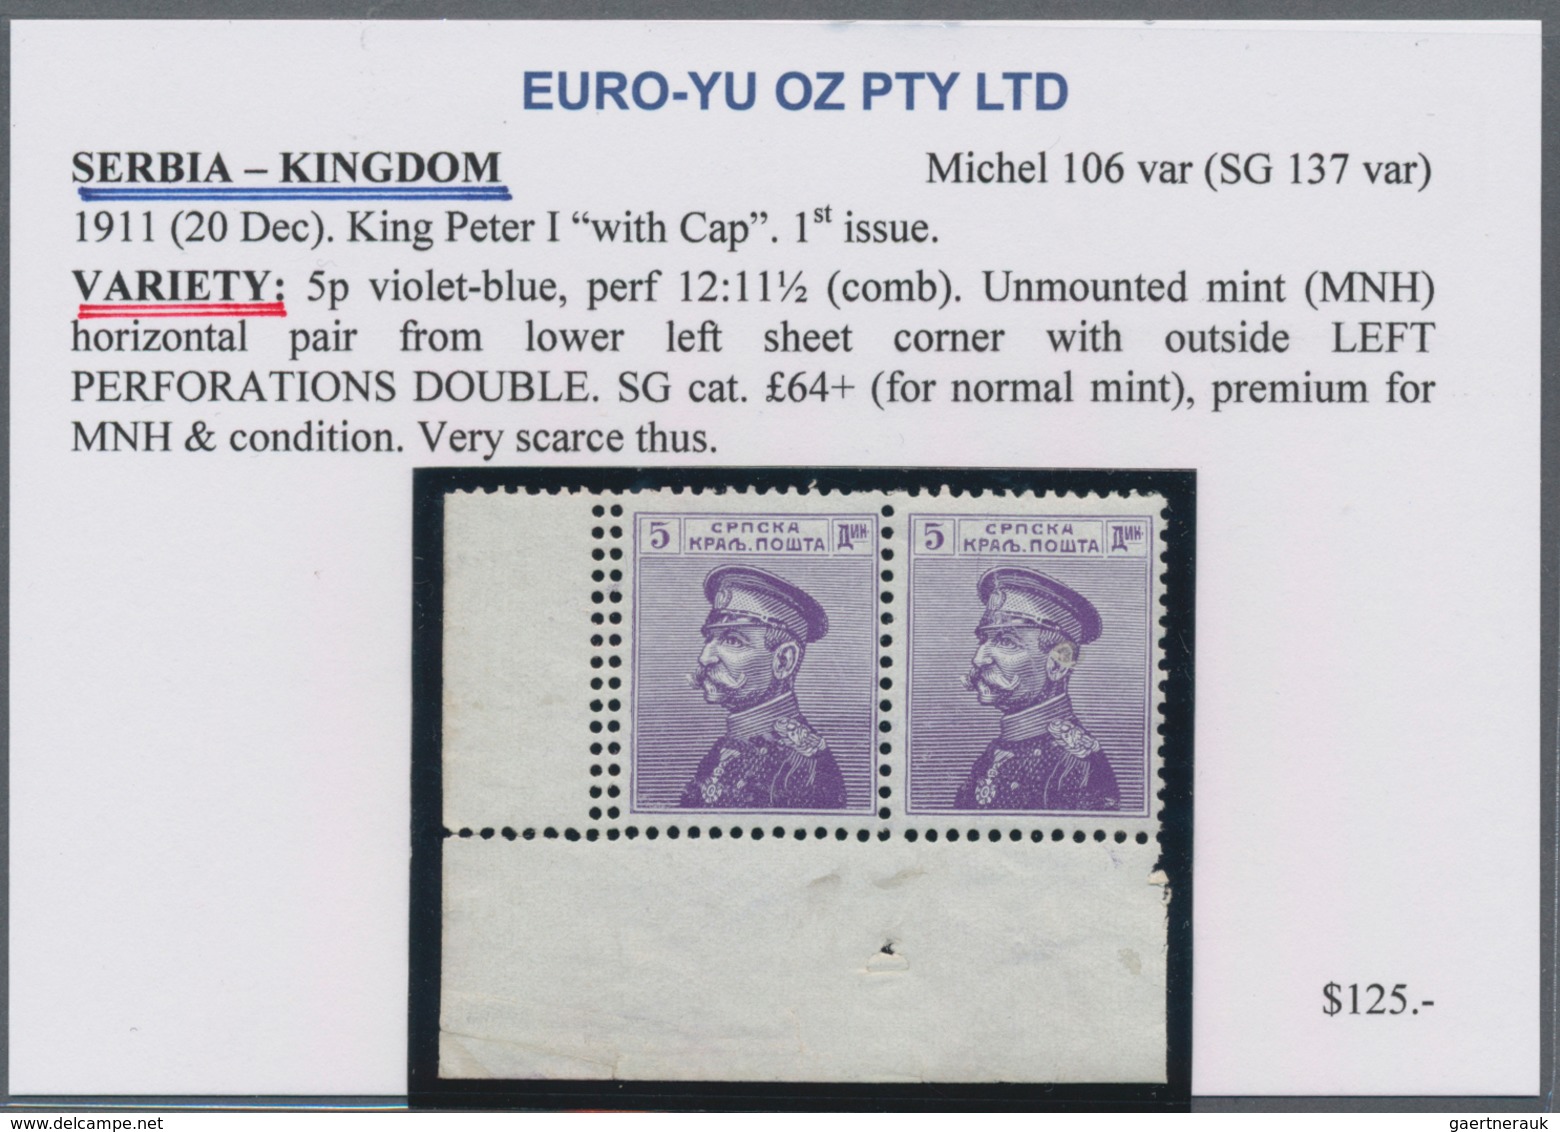 Serbien: 1911, Definitives "Peter", specialised assortment of apprx. 49 stamps incl. imperfs, double